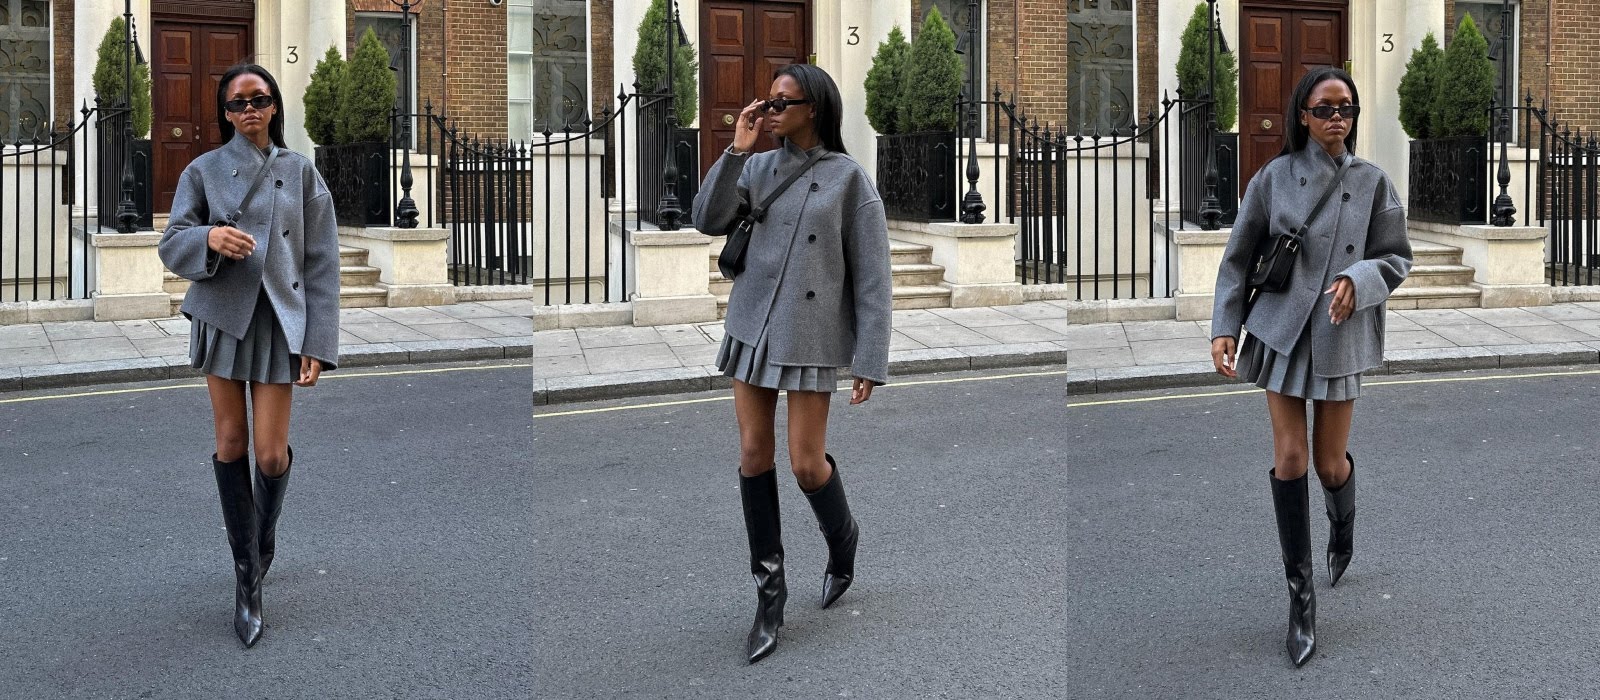 Knee-high boots are the wardrobe staple that will elevate any outfit this winter